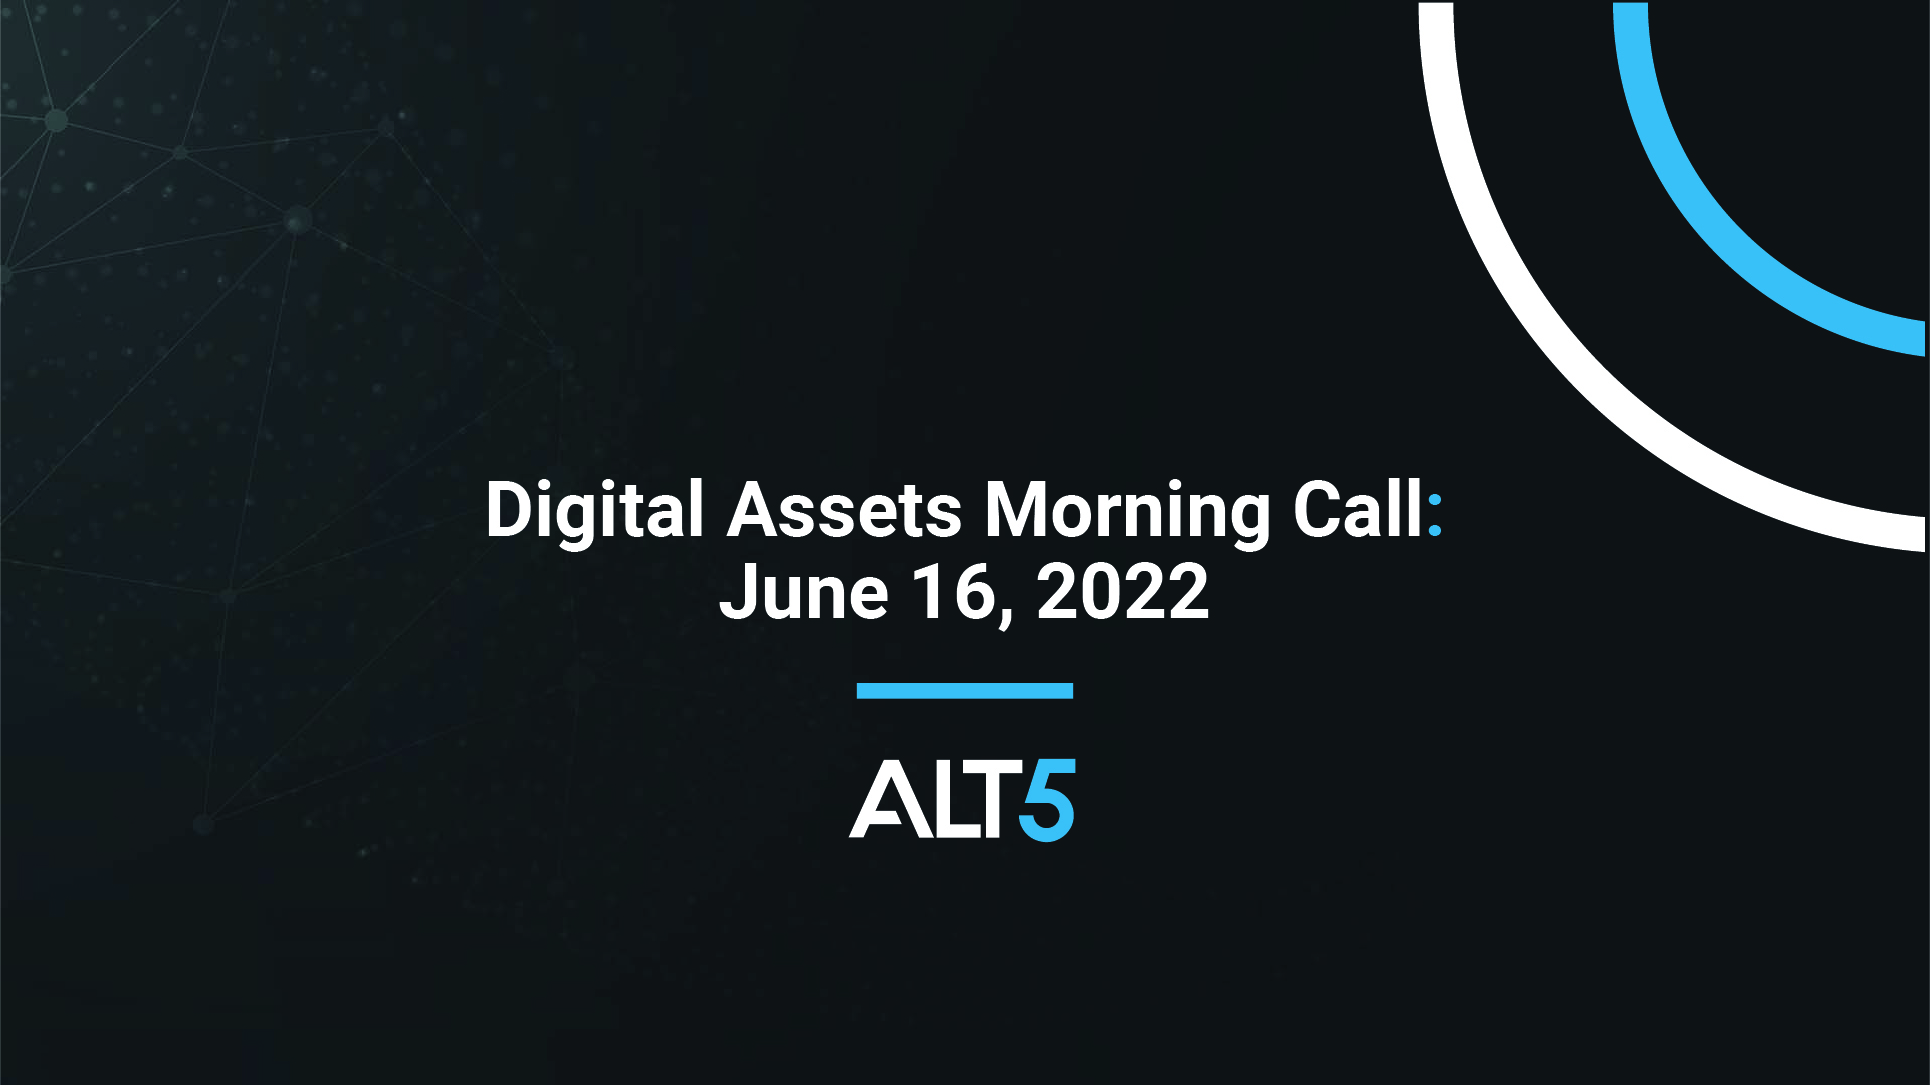 Digital Assets Morning Call: June 16 2022 - Latest string of central bank tightening keeps crypto token prices under pressure